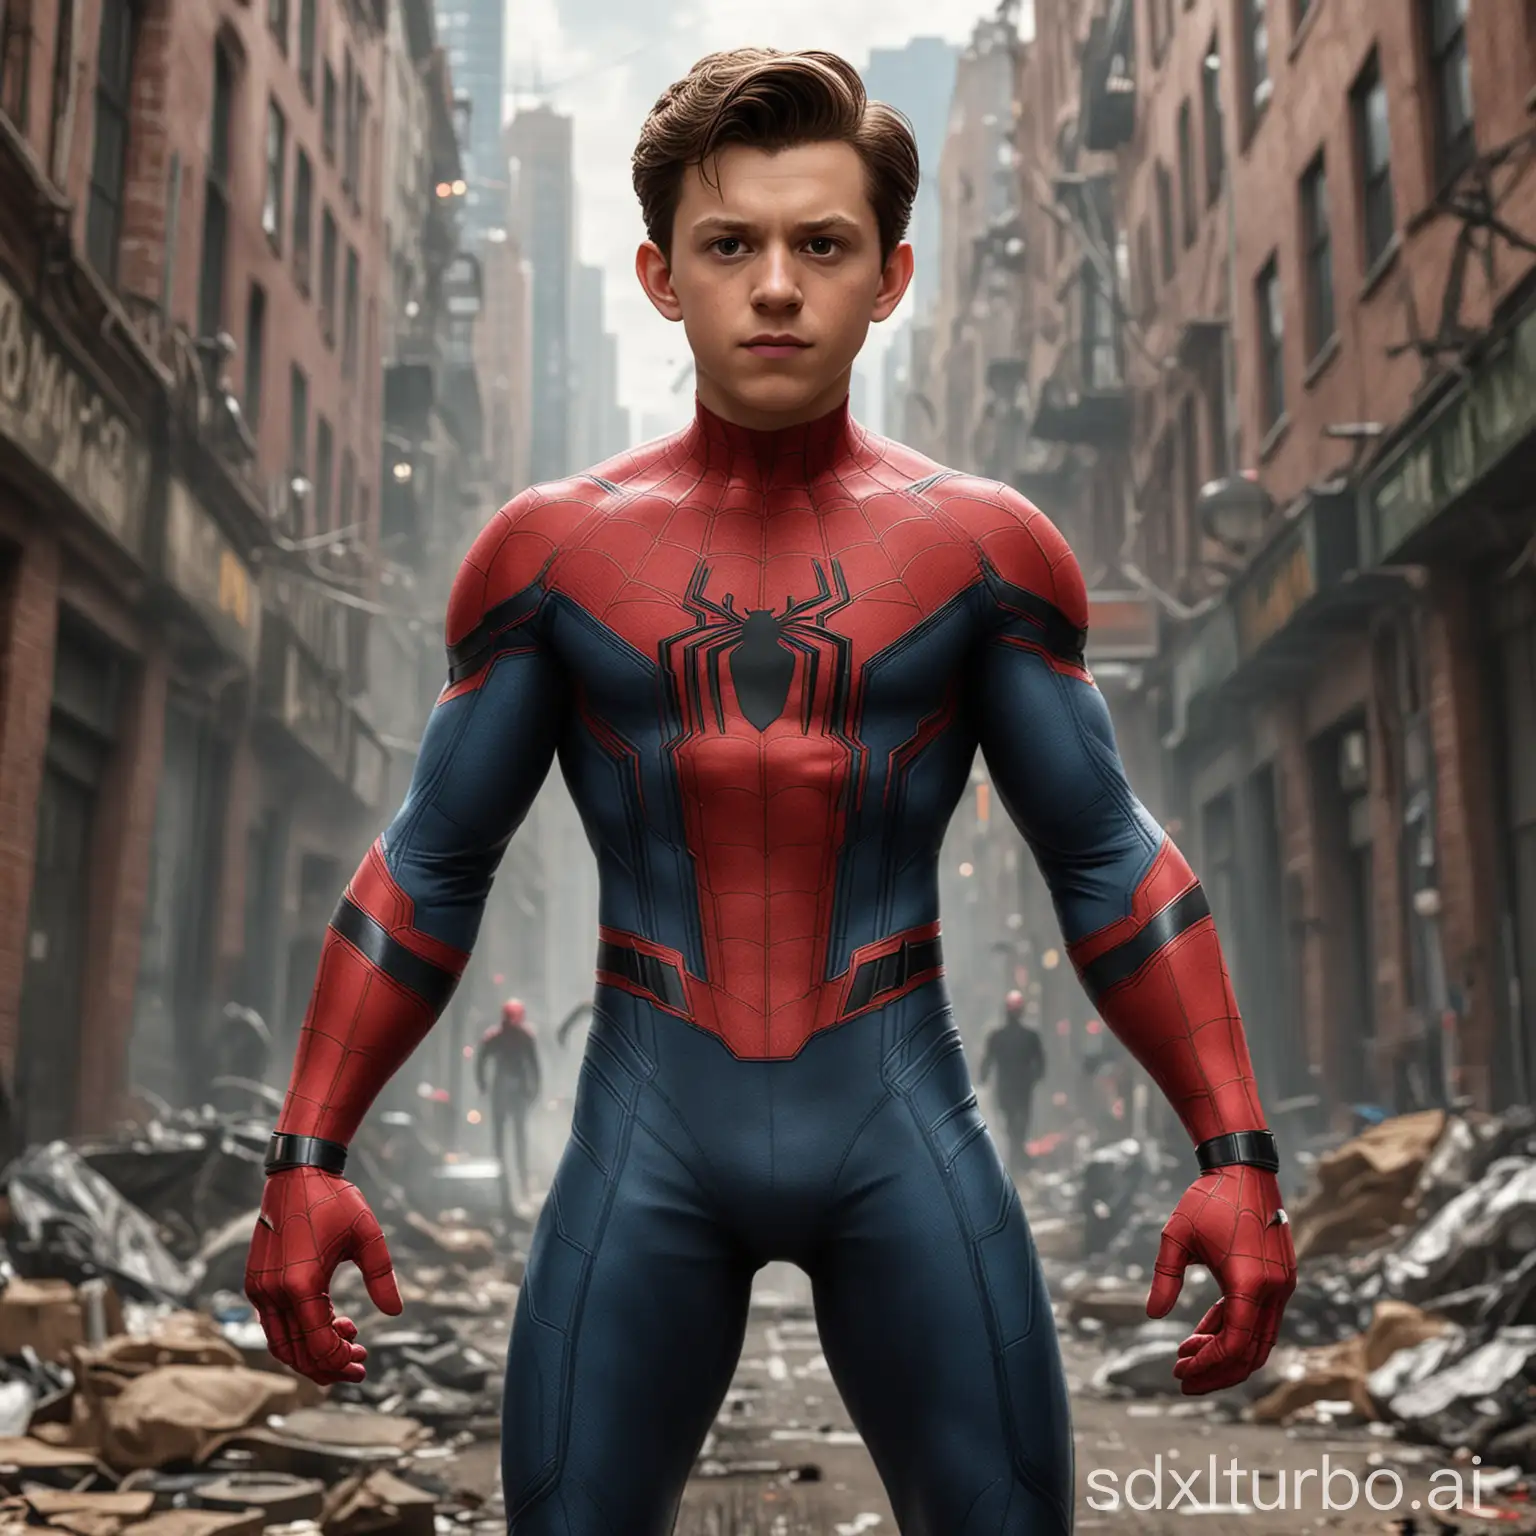 head to toe cartoon caricature of Tom Holland as Spiderman ((((without mask))) in futuristic costume, exageration, big head caricature style, full body view, avengger movie scene film background, high quality, best quality